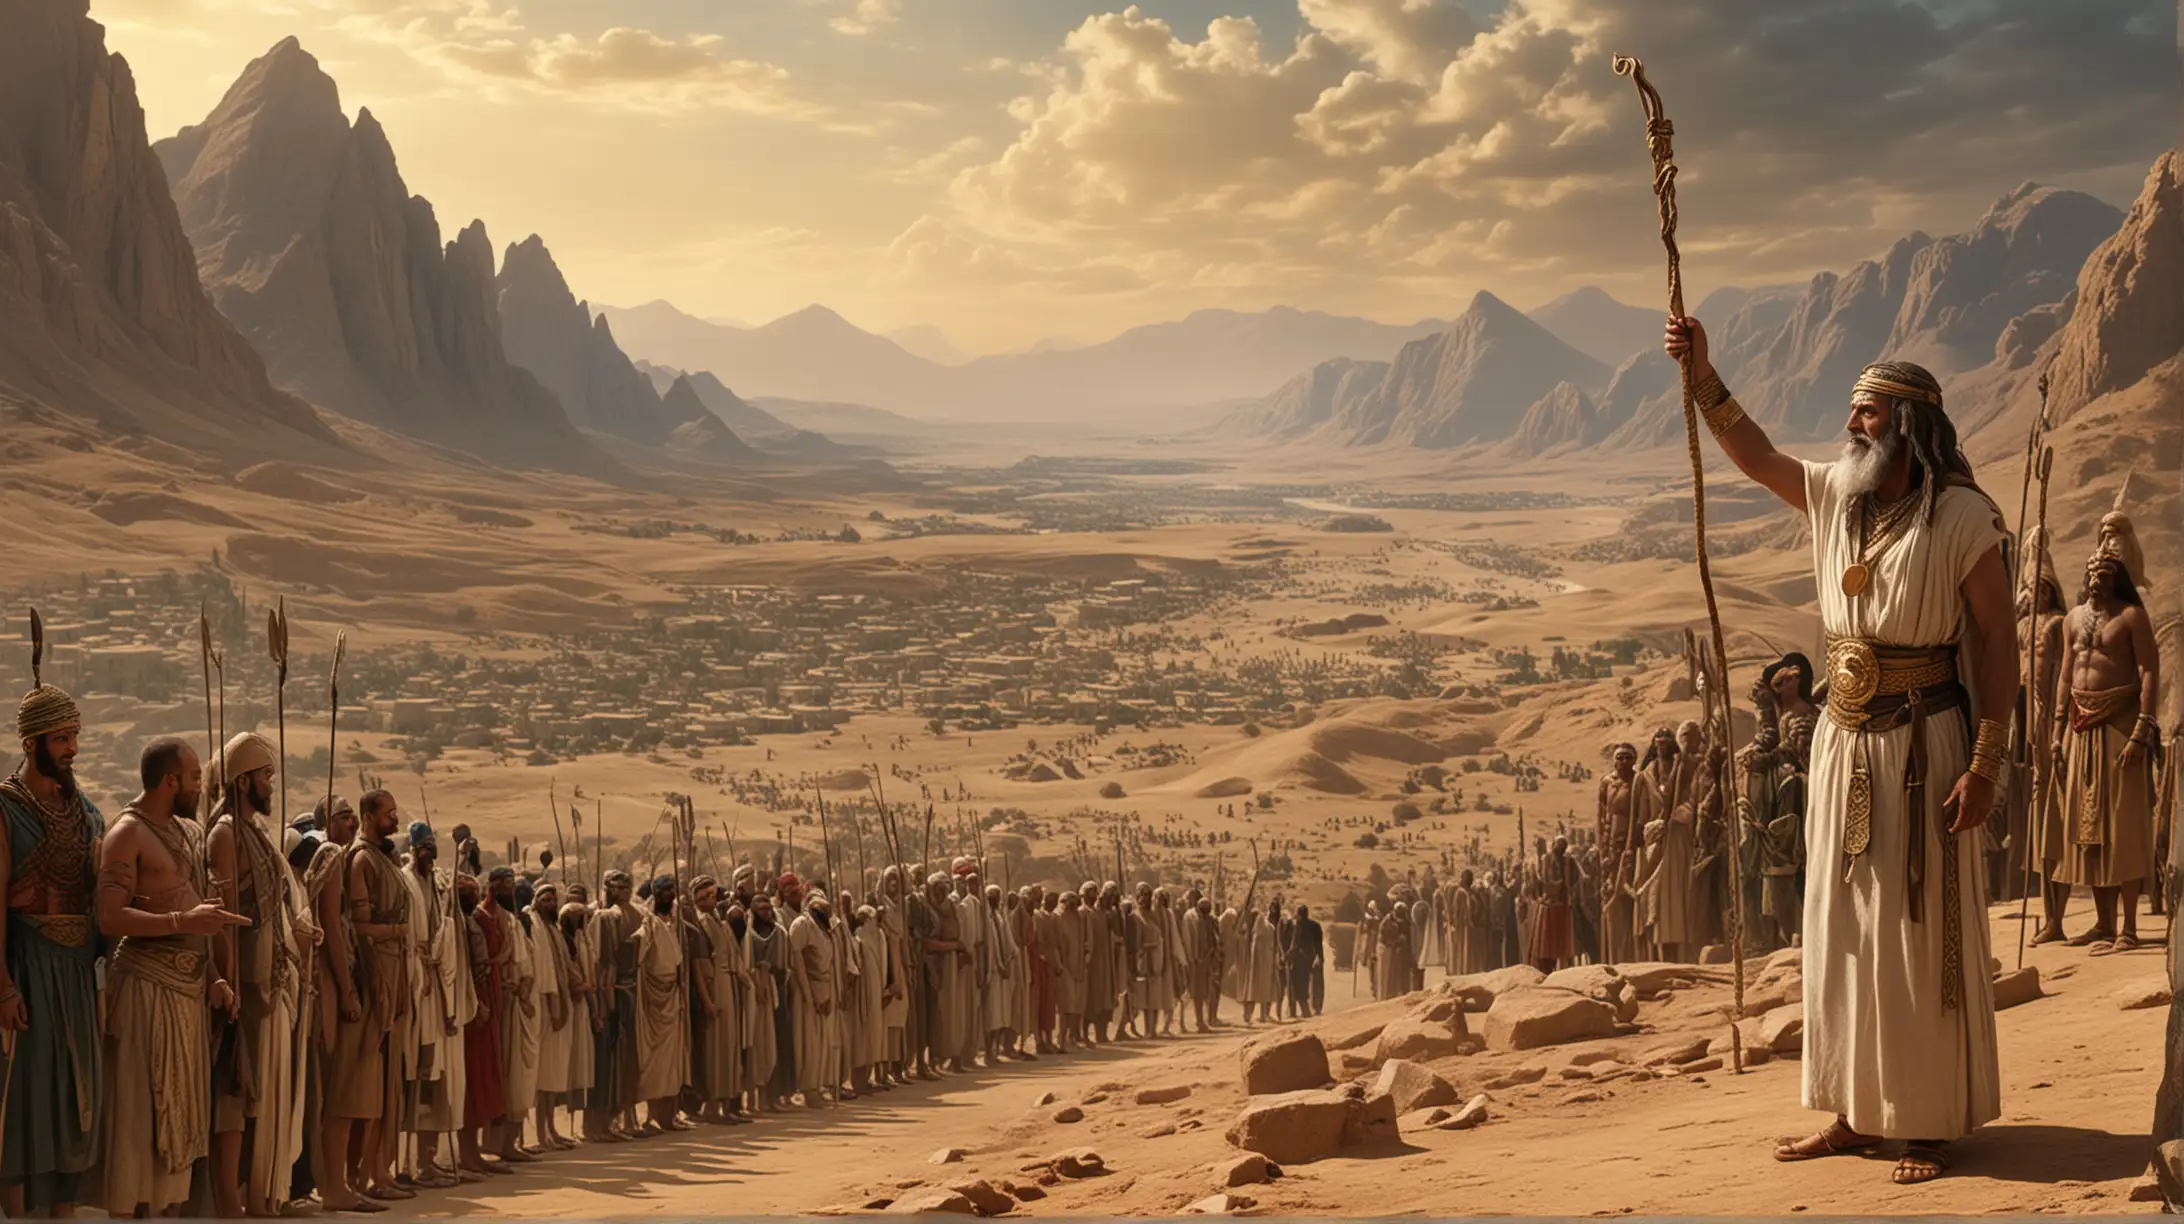 Moses meets Pharaoh, and his rod becomes a serpent, In the background, you see mountains, and the Isreali people gathered. Set during the era of the Biblical Moses.